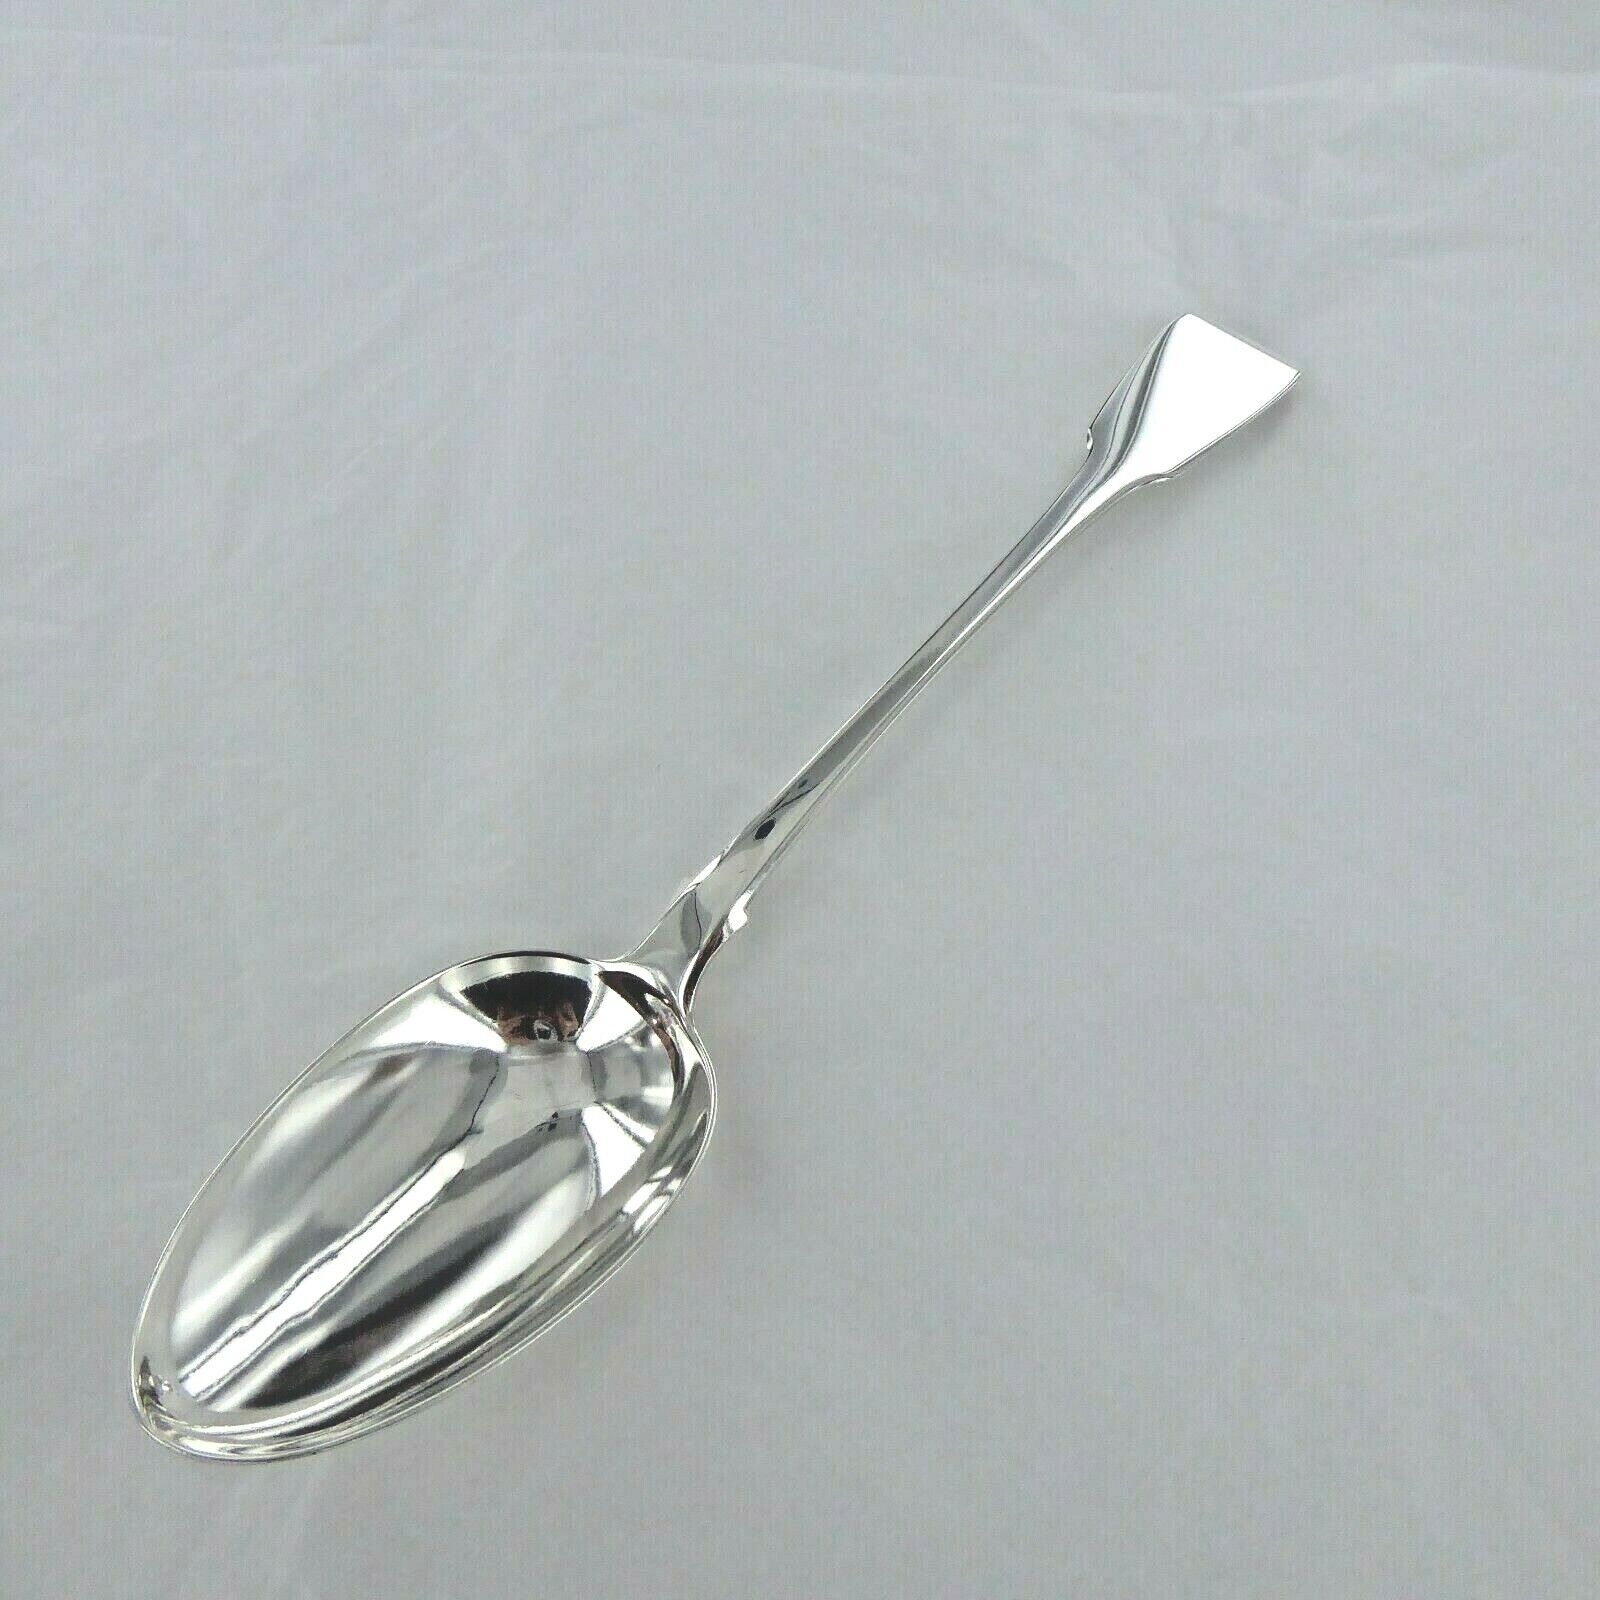  STERLING SILVER FIDDLE BACK  BASTING, STUFFING OR SERVING SPOON , LONDON 1822..